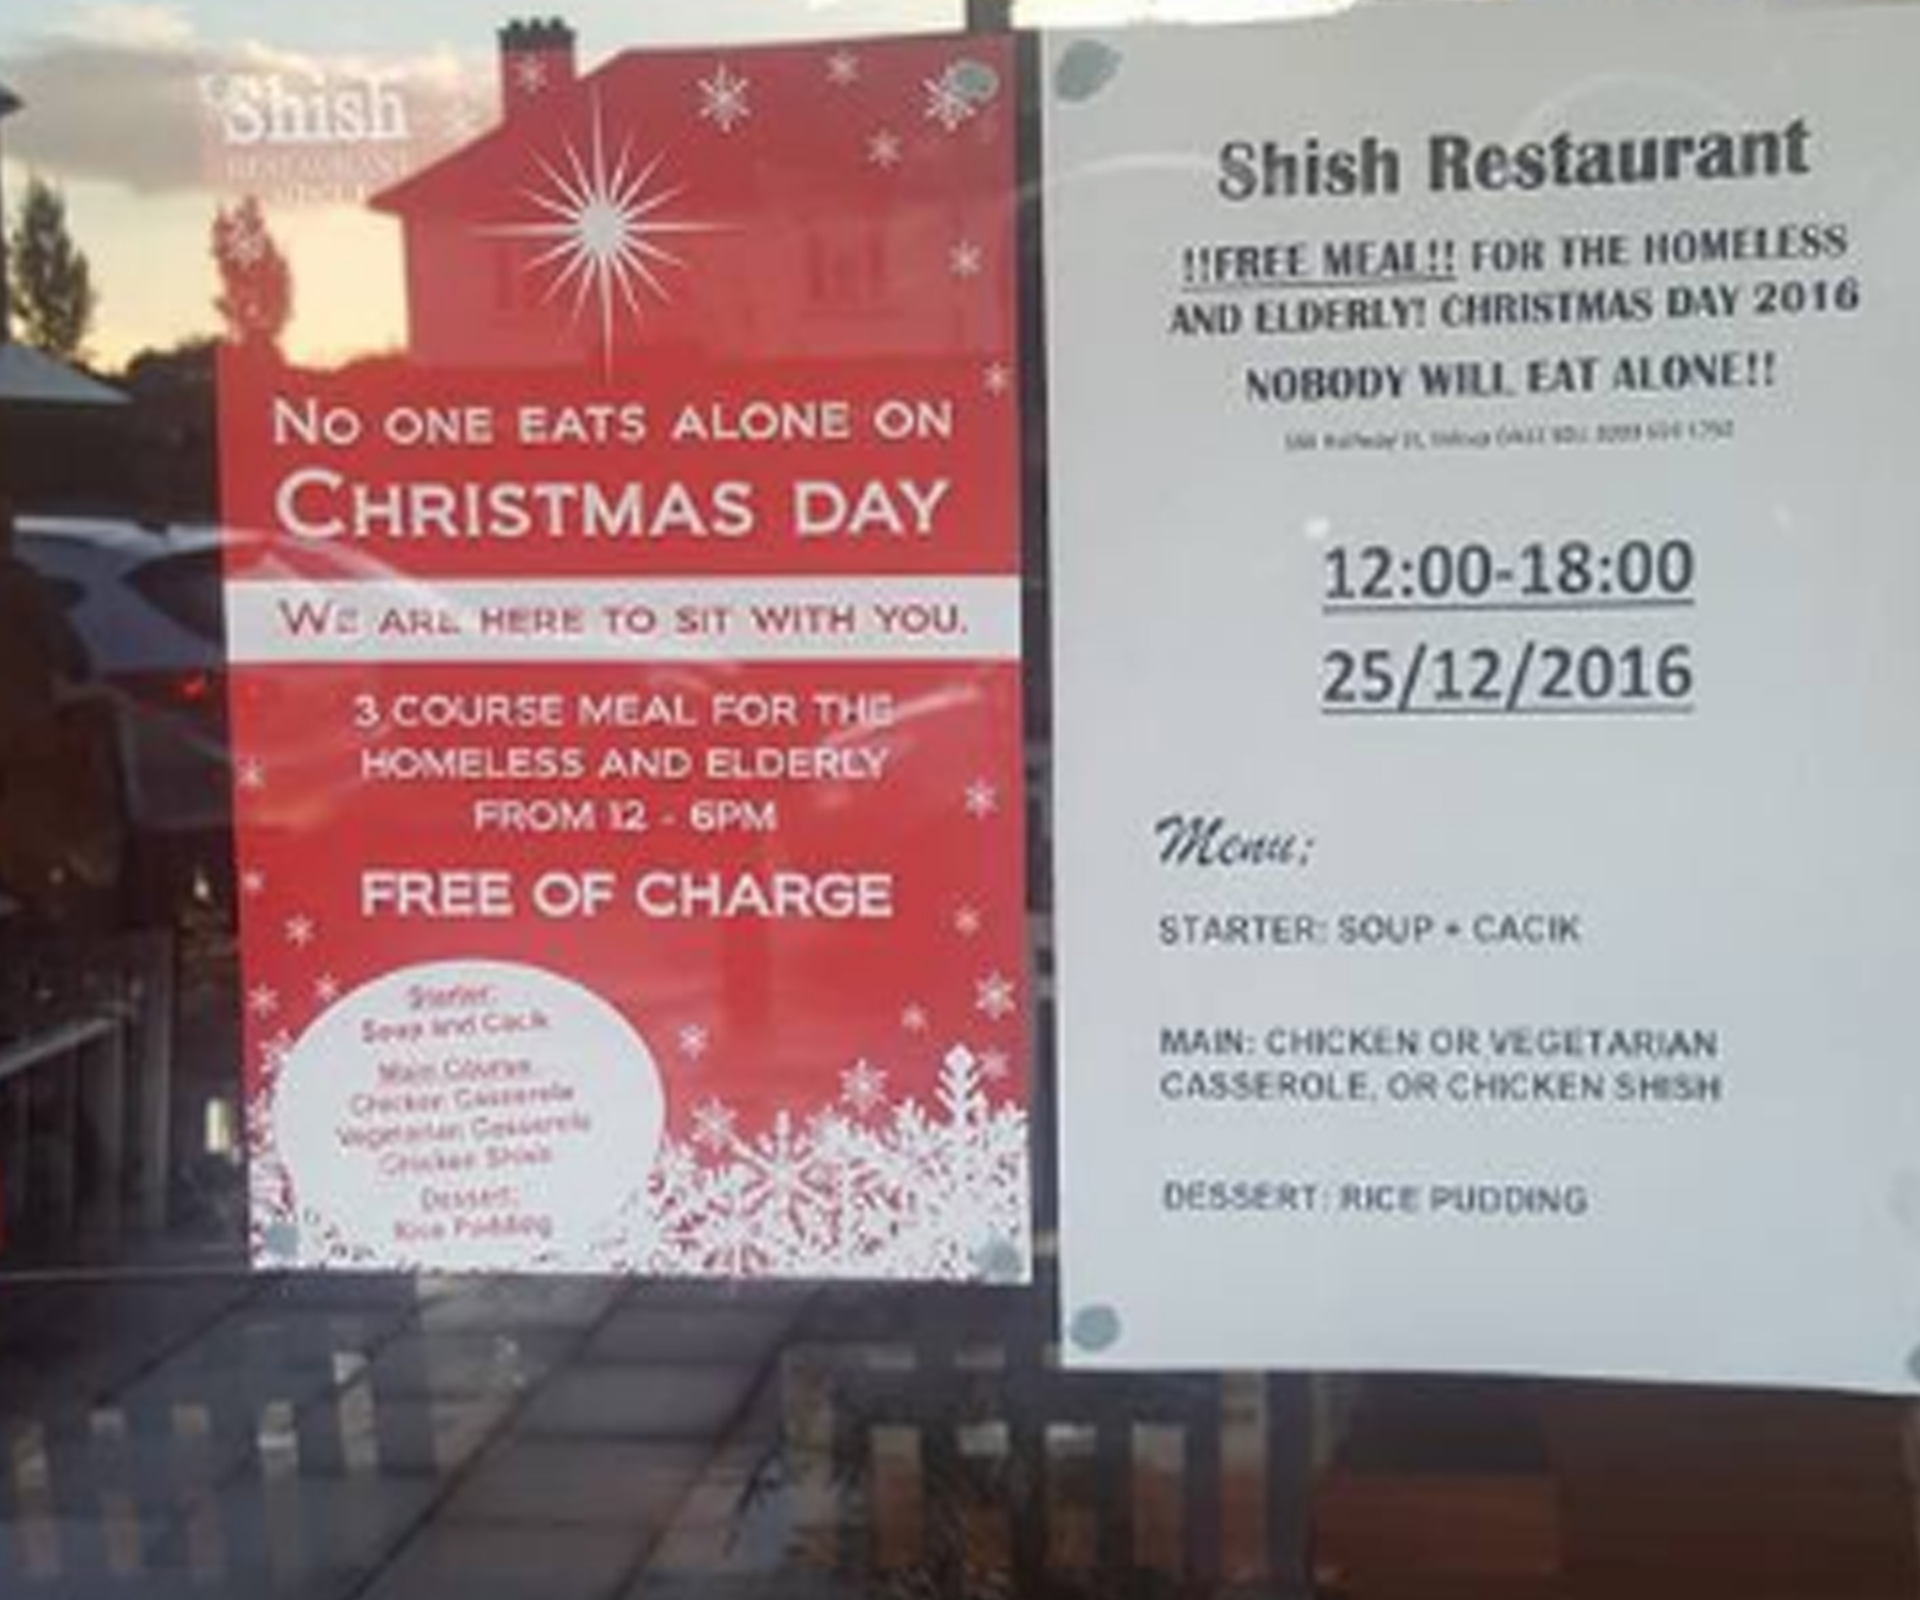 Muslim-owned restaurant offers free Christmas meals for those in need